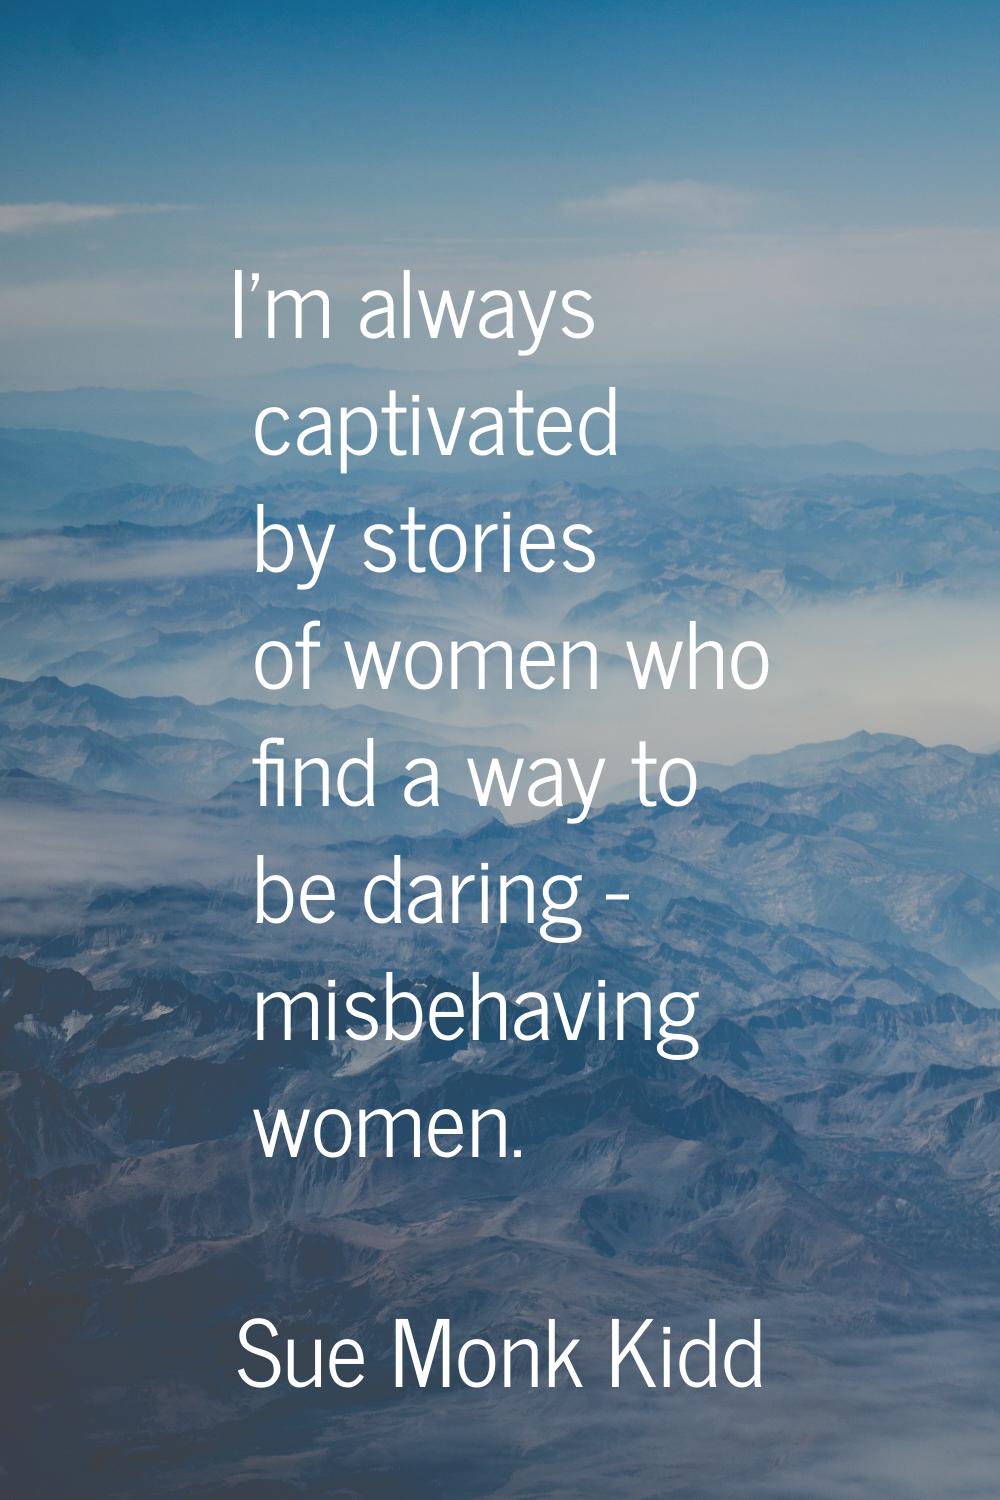 I'm always captivated by stories of women who find a way to be daring - misbehaving women.